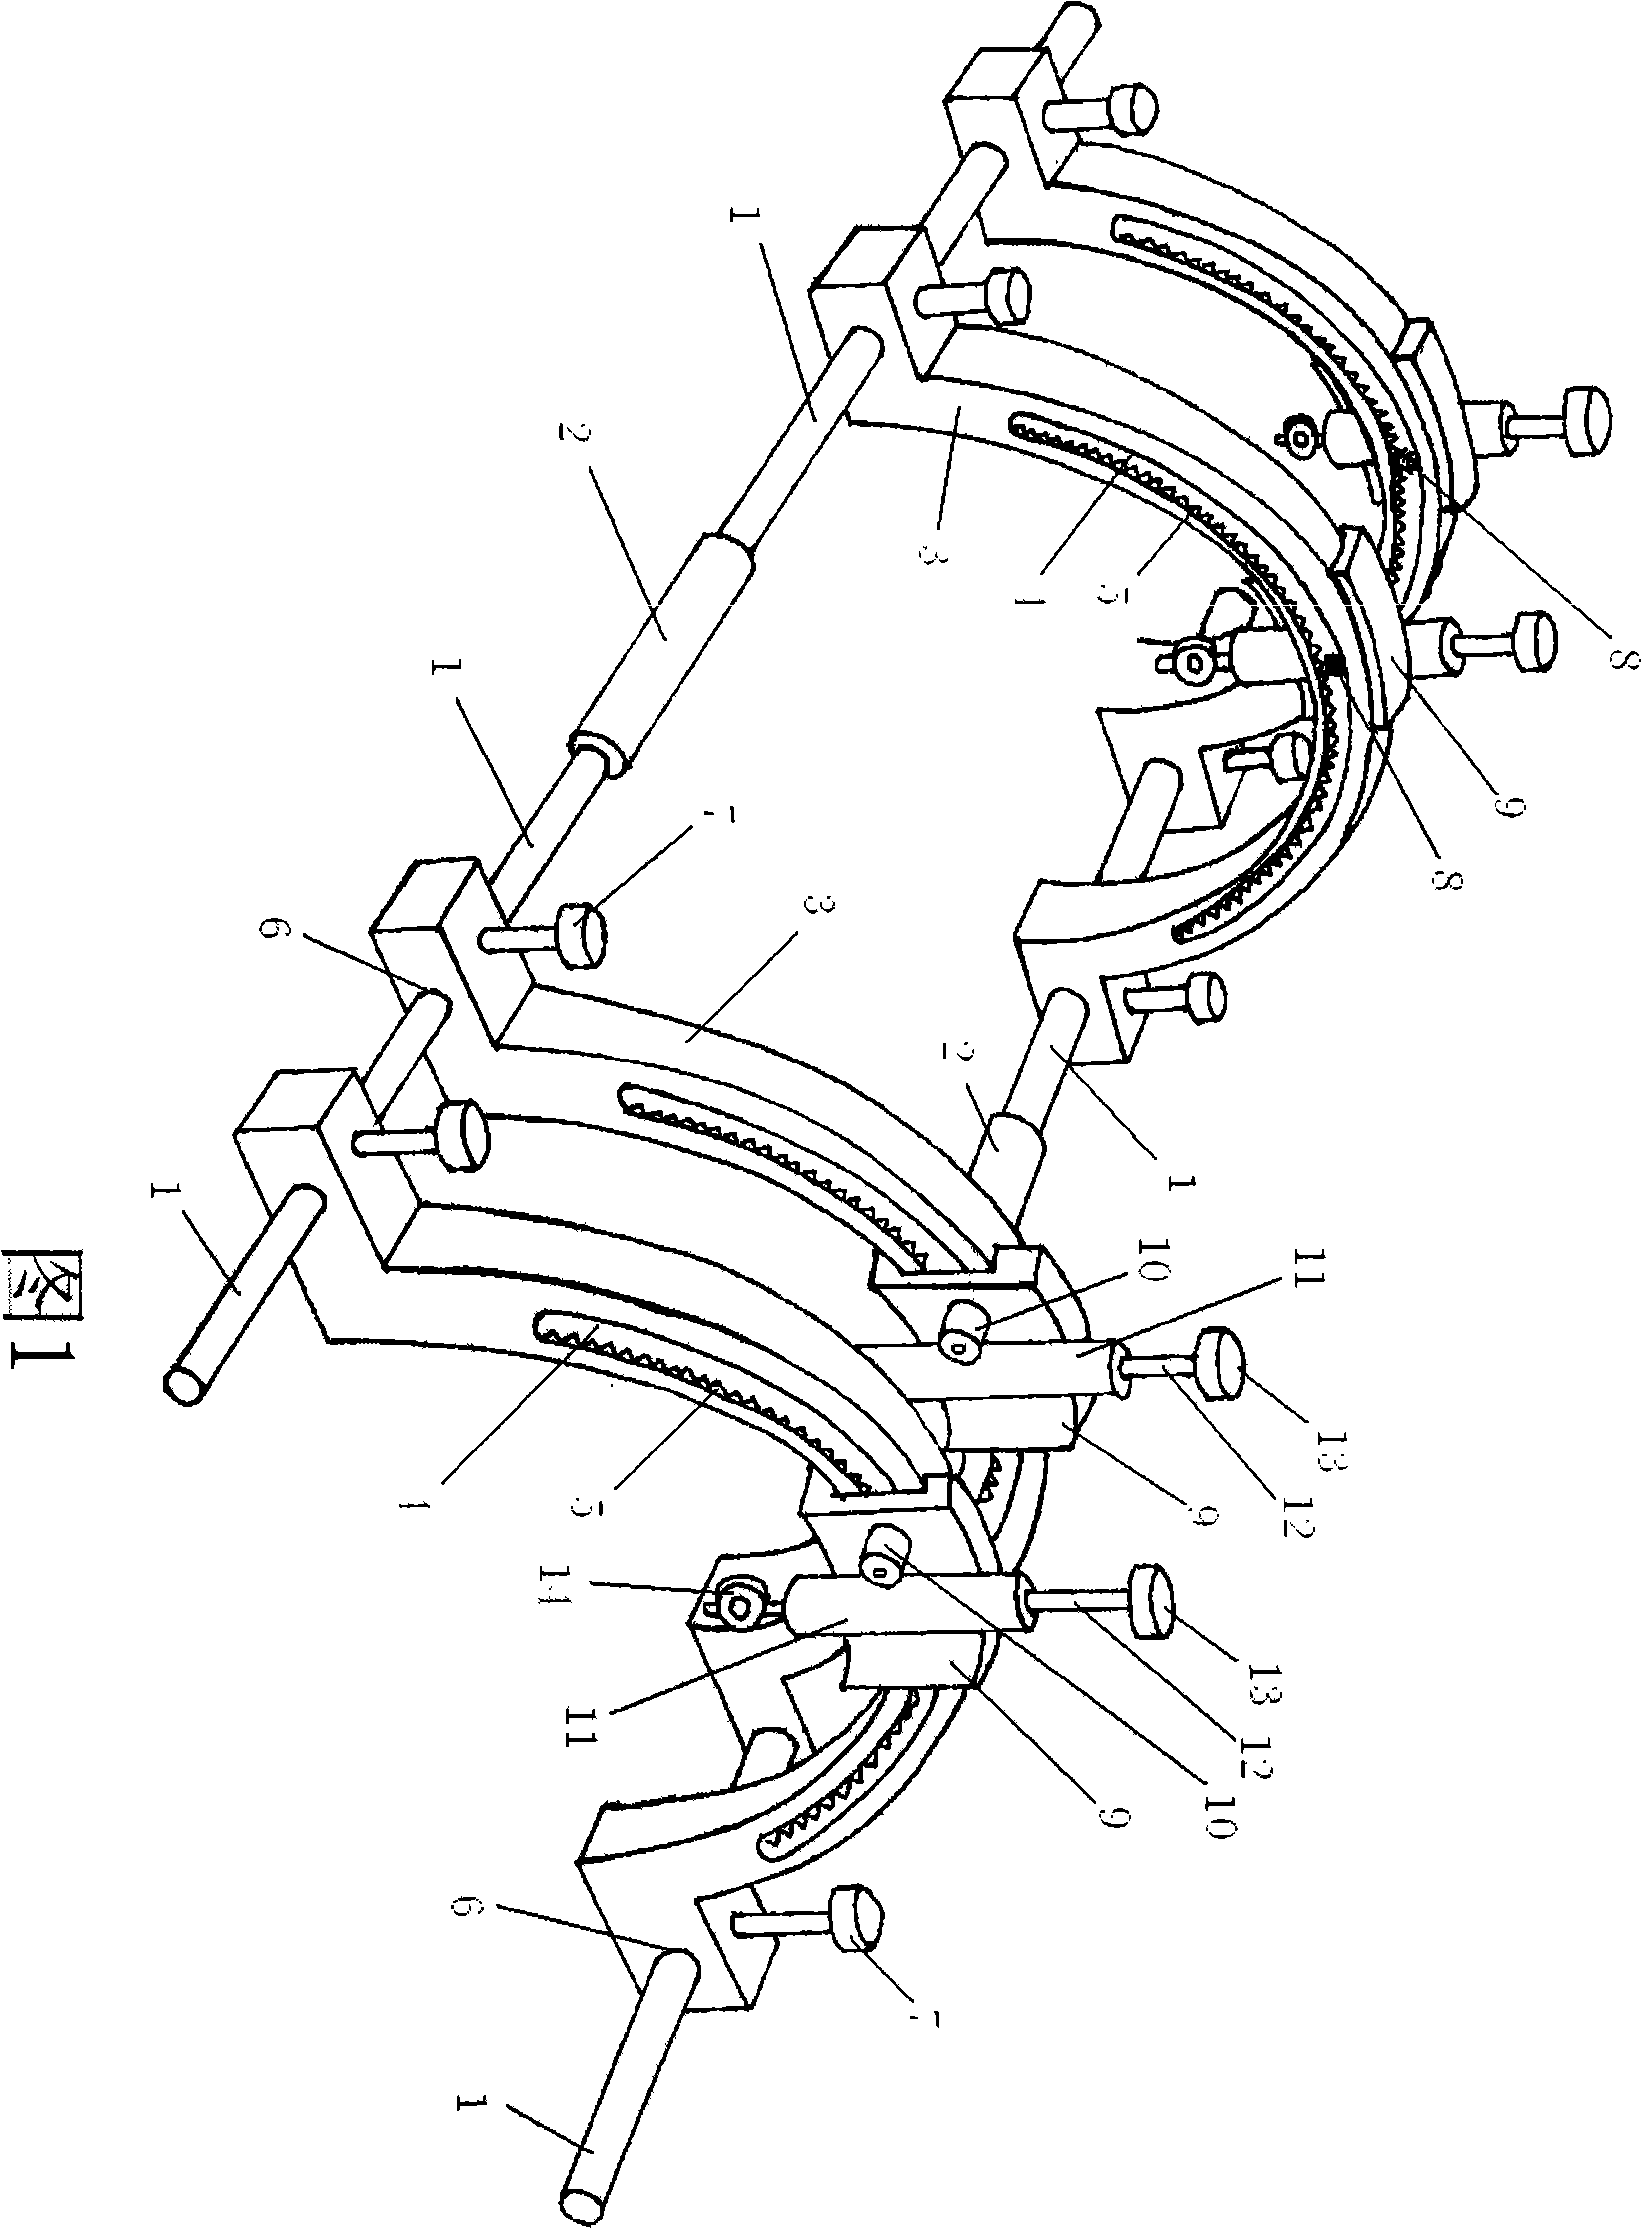 Limb fracture reduction device